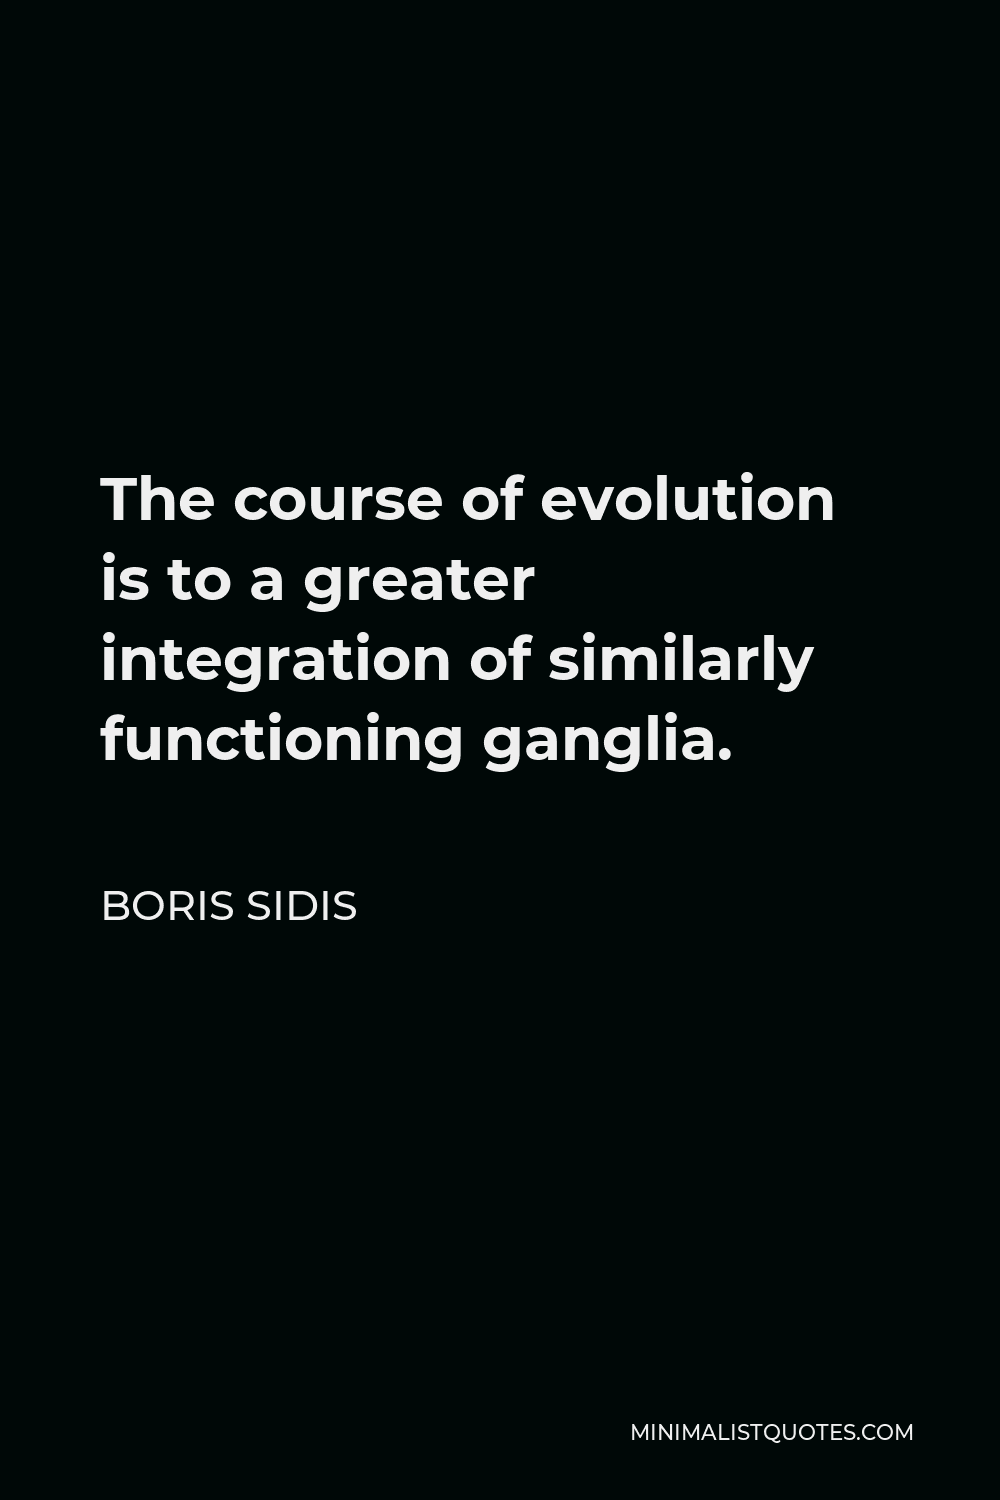 Boris Sidis Quote - The course of evolution is to a greater integration of similarly functioning ganglia.